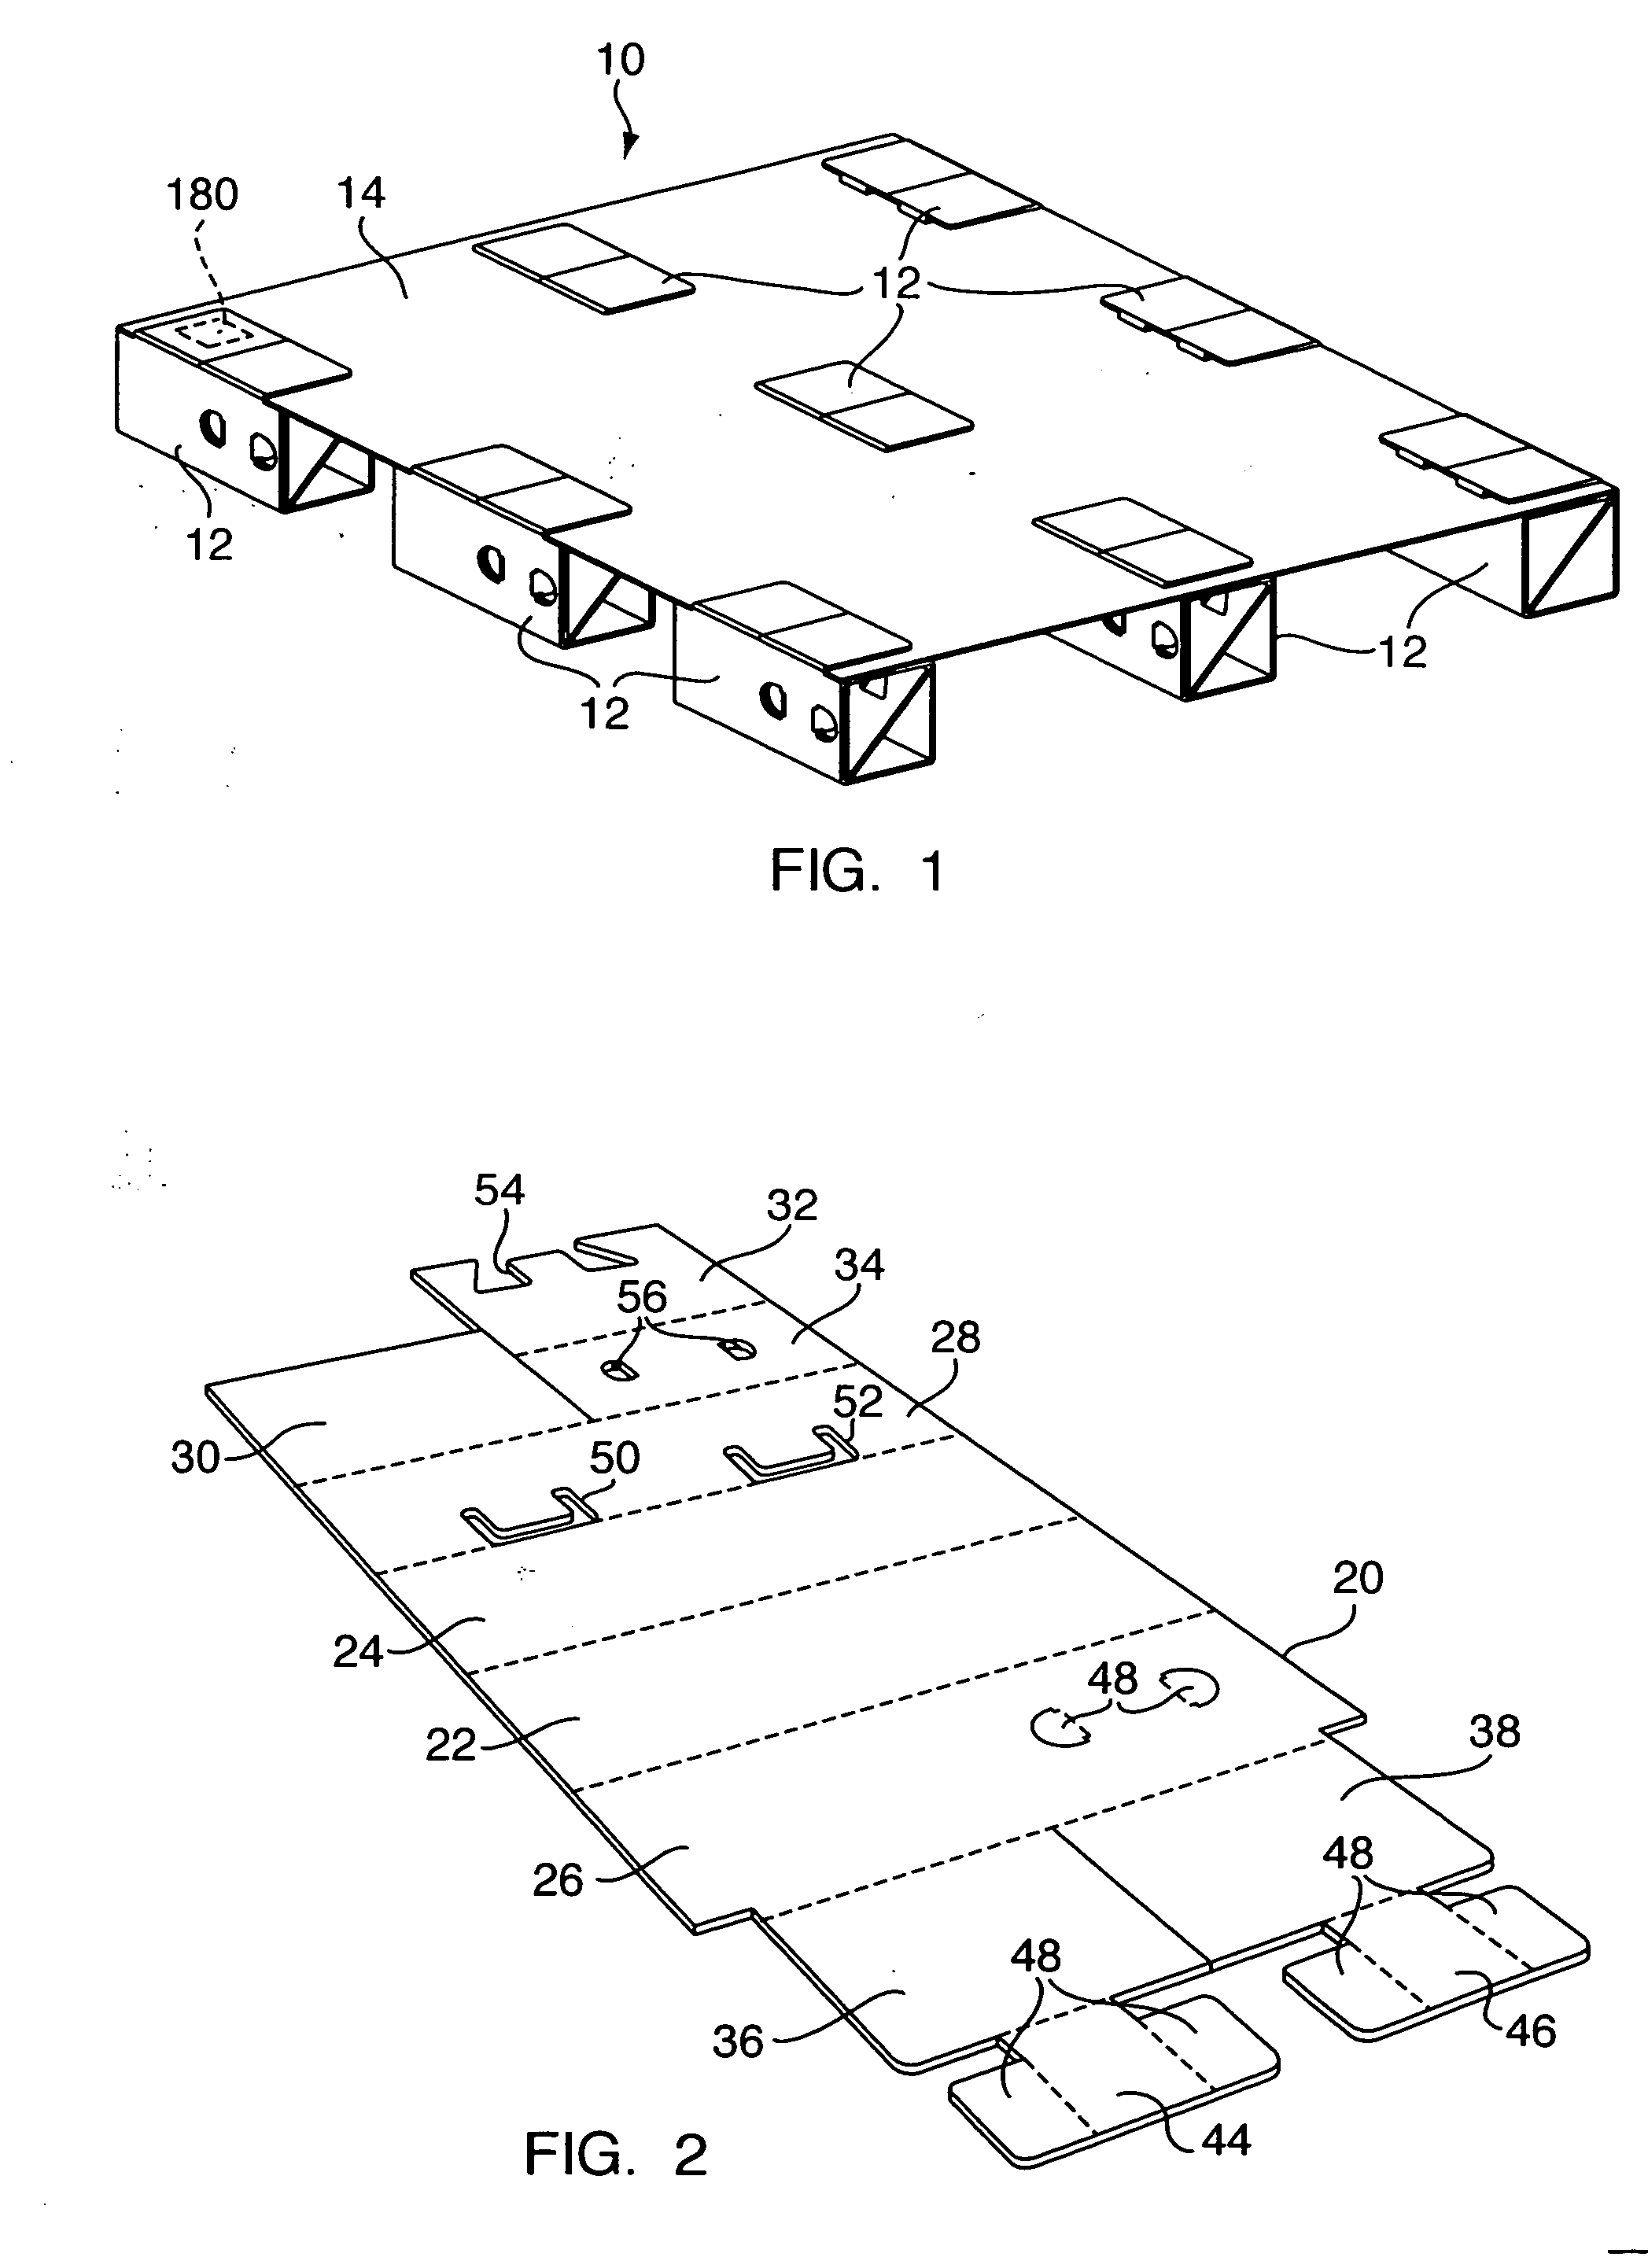 Foldable support leg and pallet assembly formed therefrom